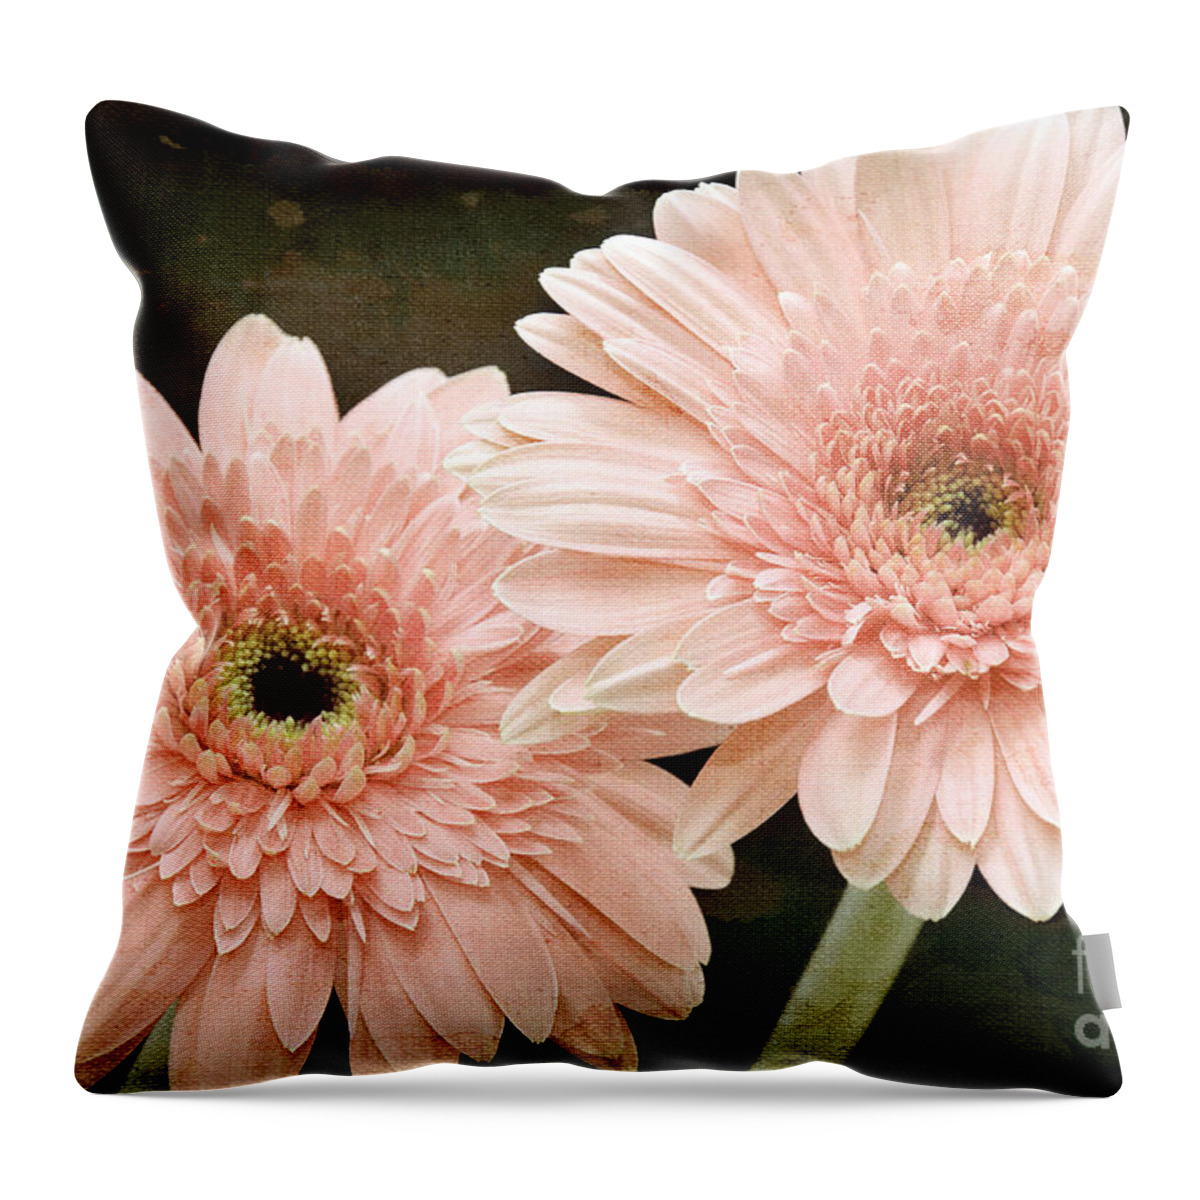 Gerber Throw Pillow featuring the photograph 2 Soft Pink Painterly Gerber Daisies by Andee Design